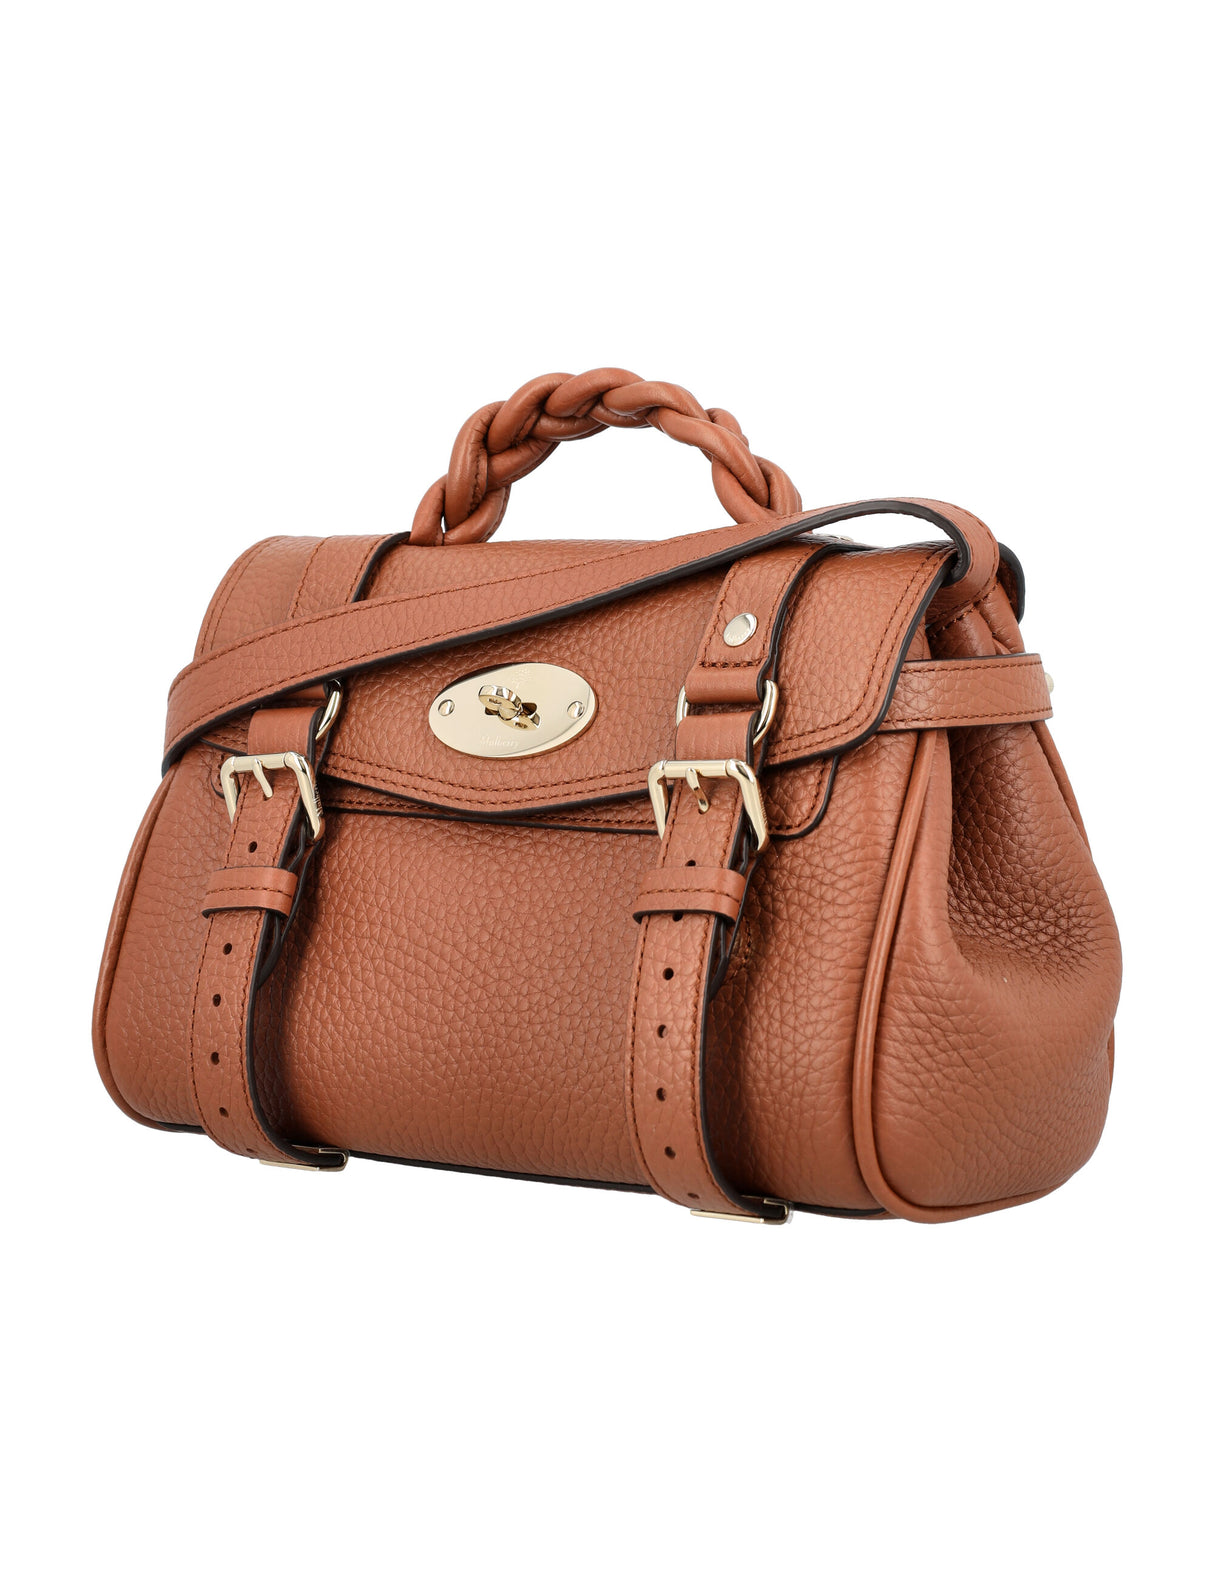 MULBERRY Mini Alexa Chestnut Leather Shoulder Bag with Braided Handle and Postman's Lock Closure